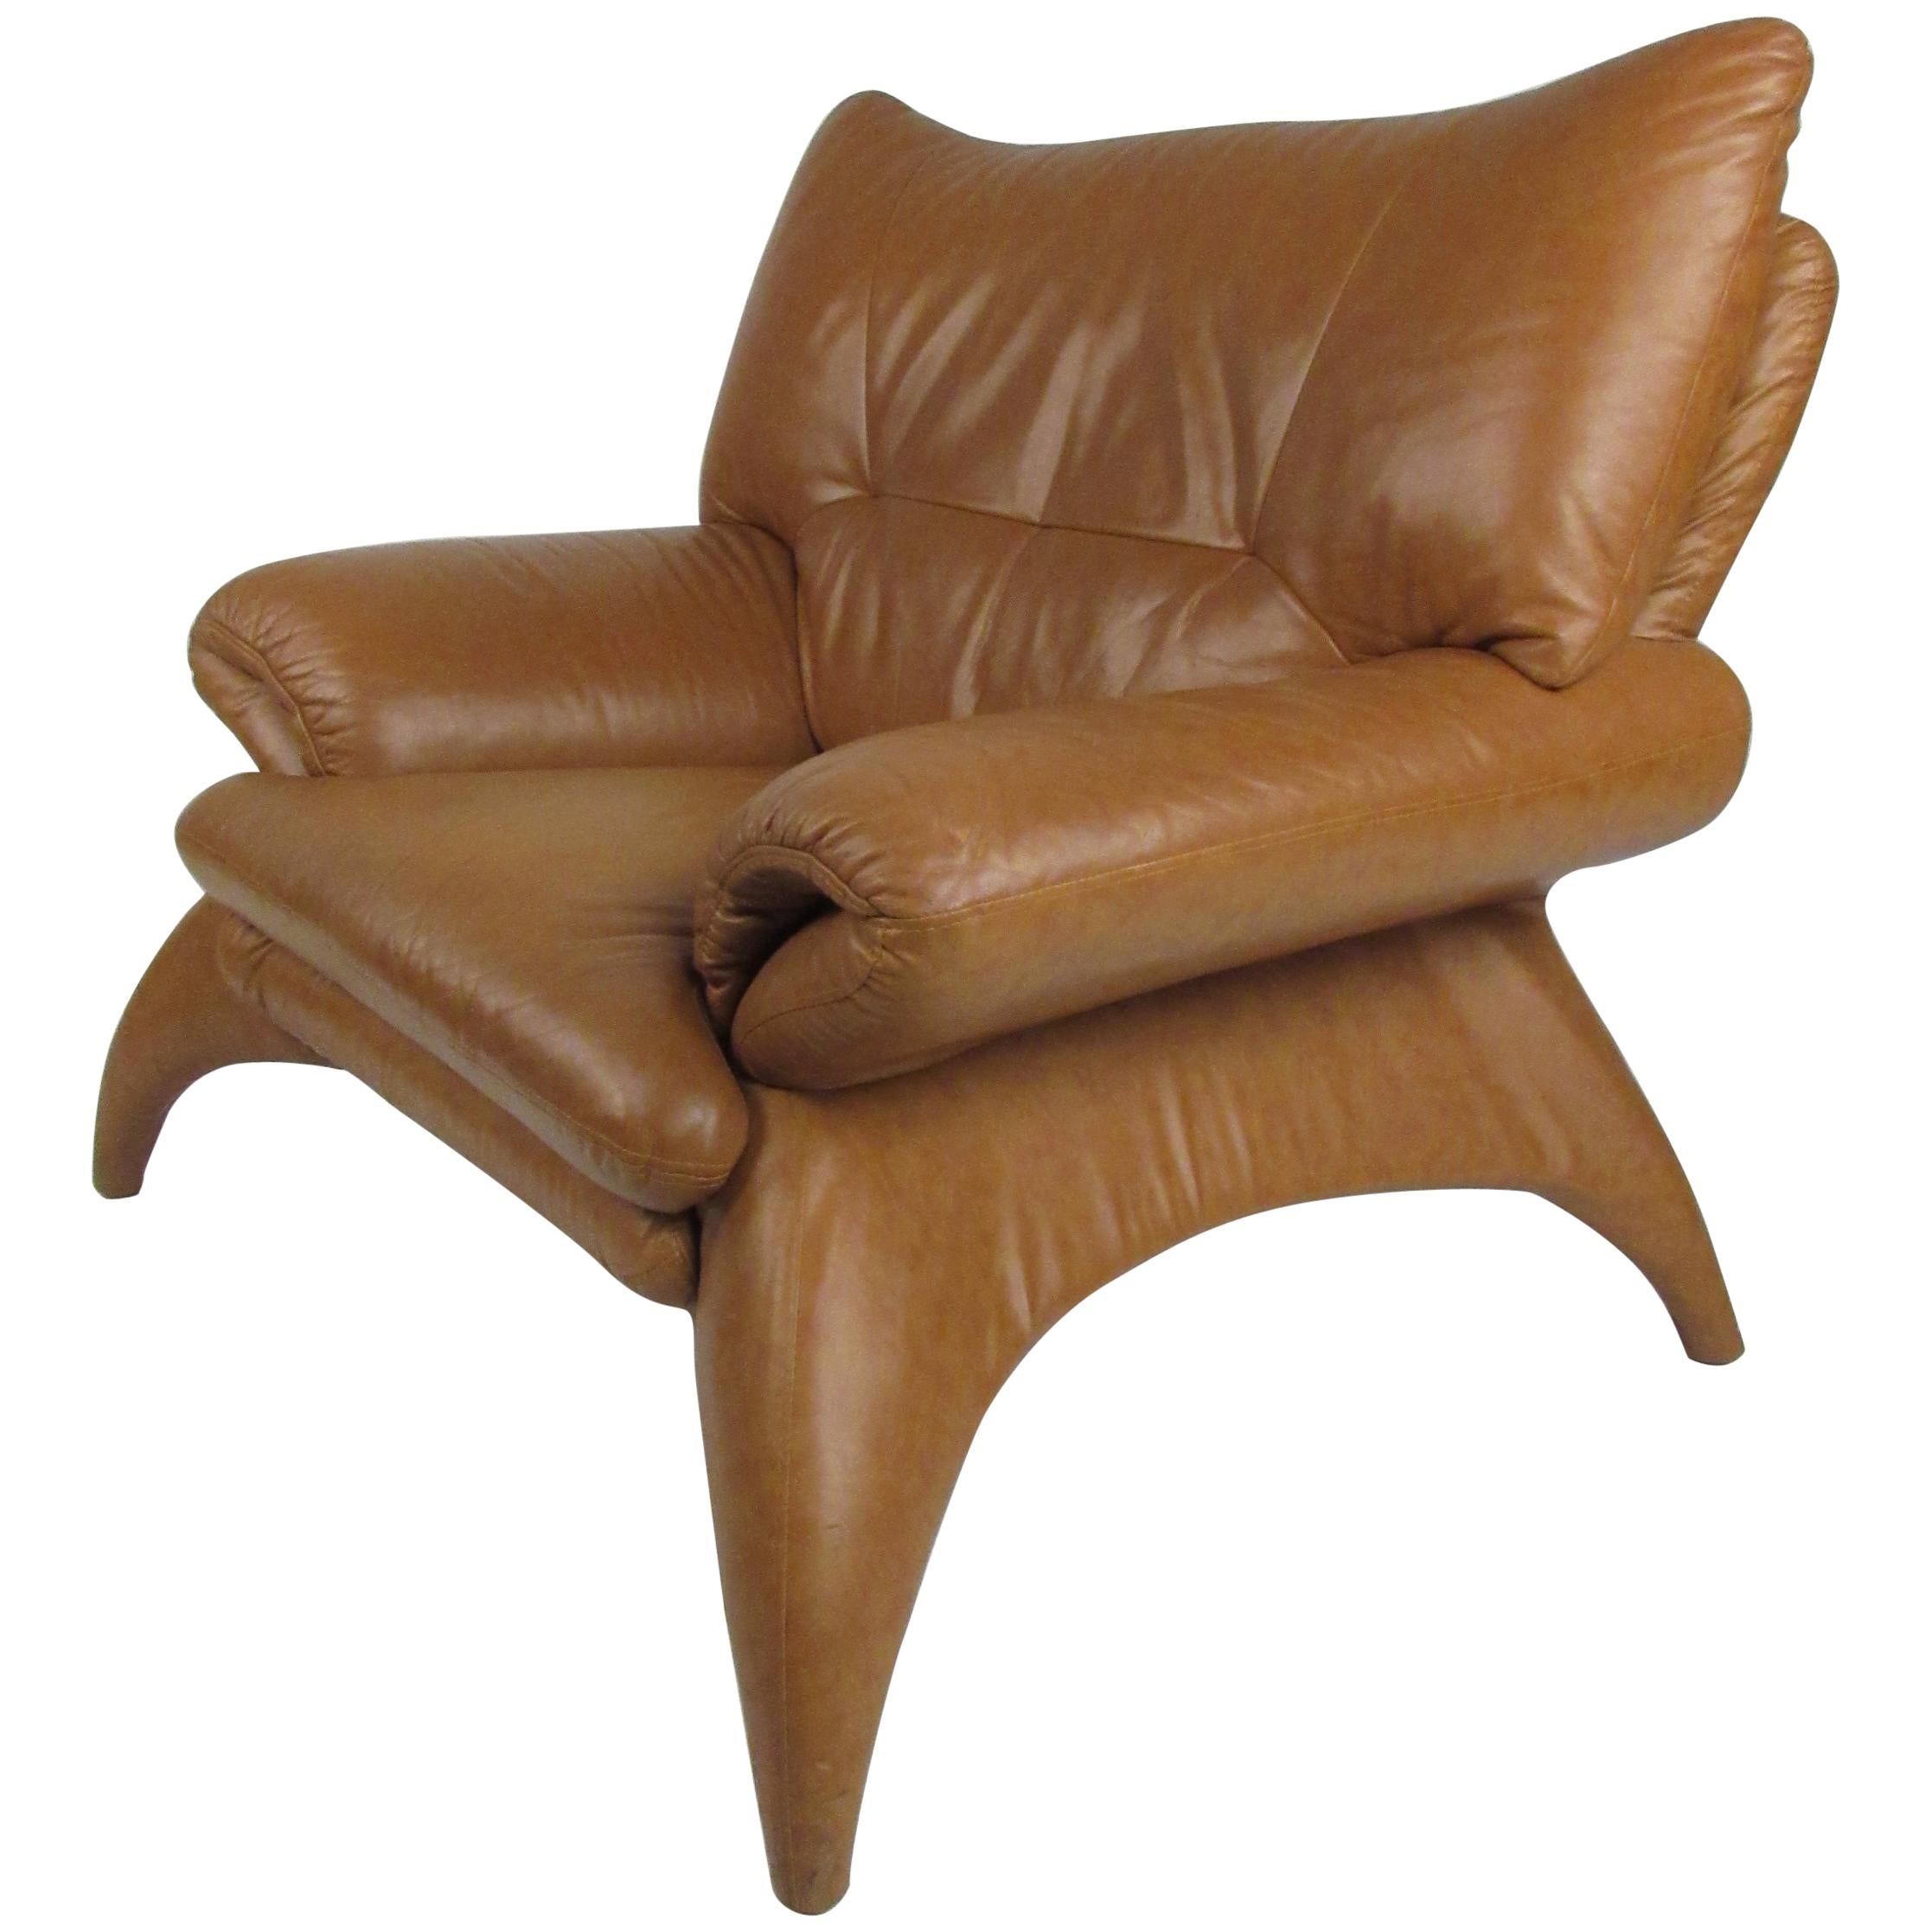 Unusual Contemporary Modern Lounge Chair